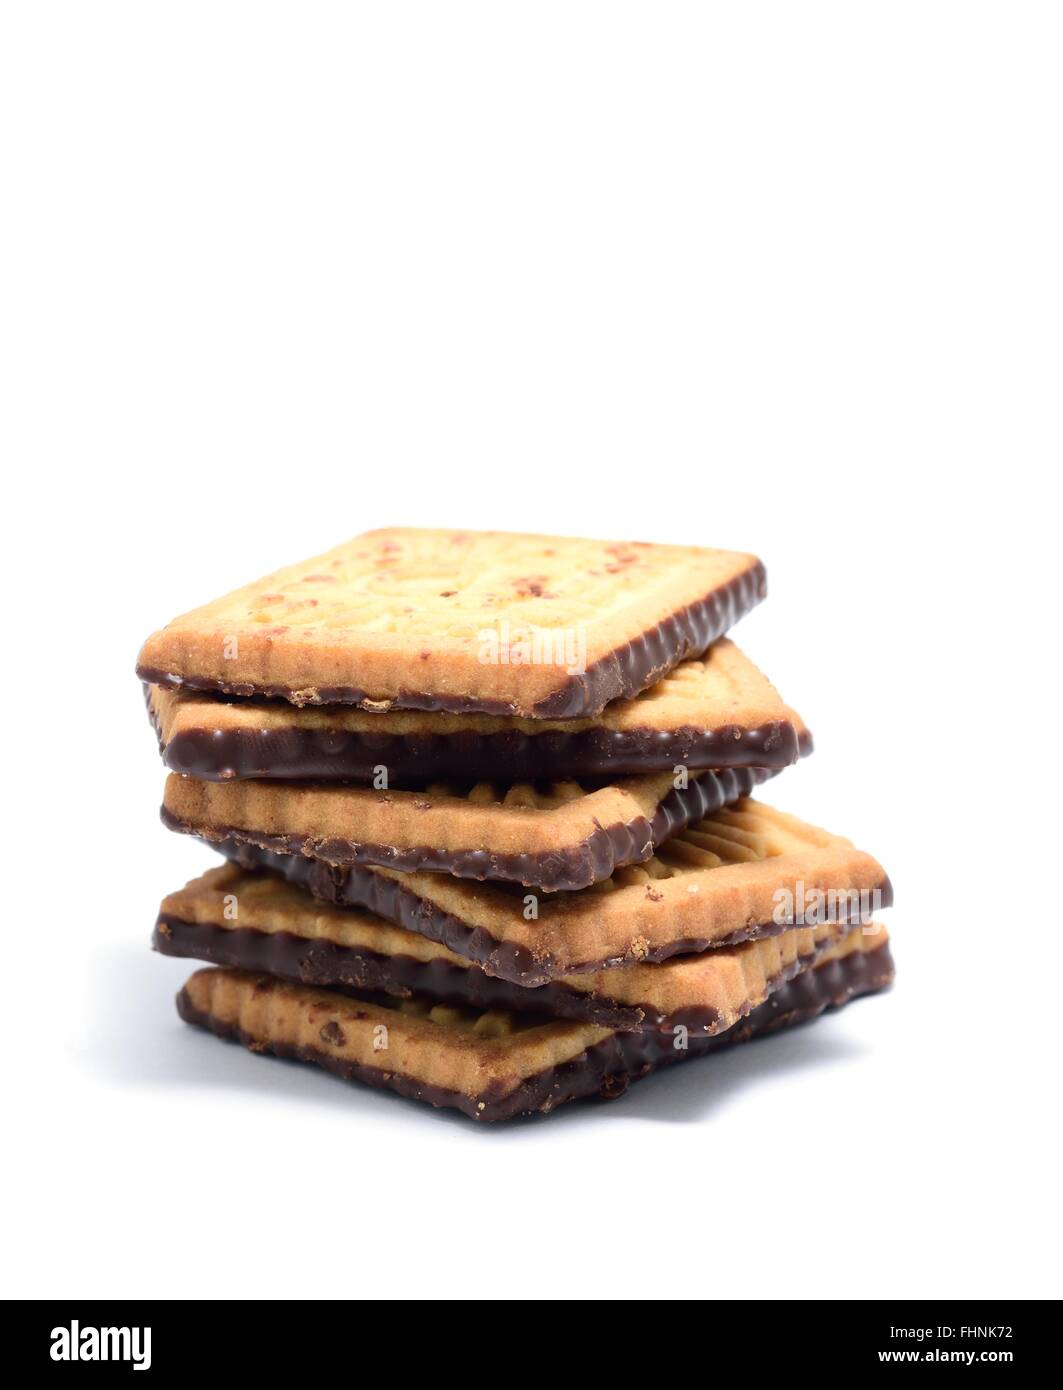 Stack of butter cookies with dark chocolate topping on a white background. Stock Photo